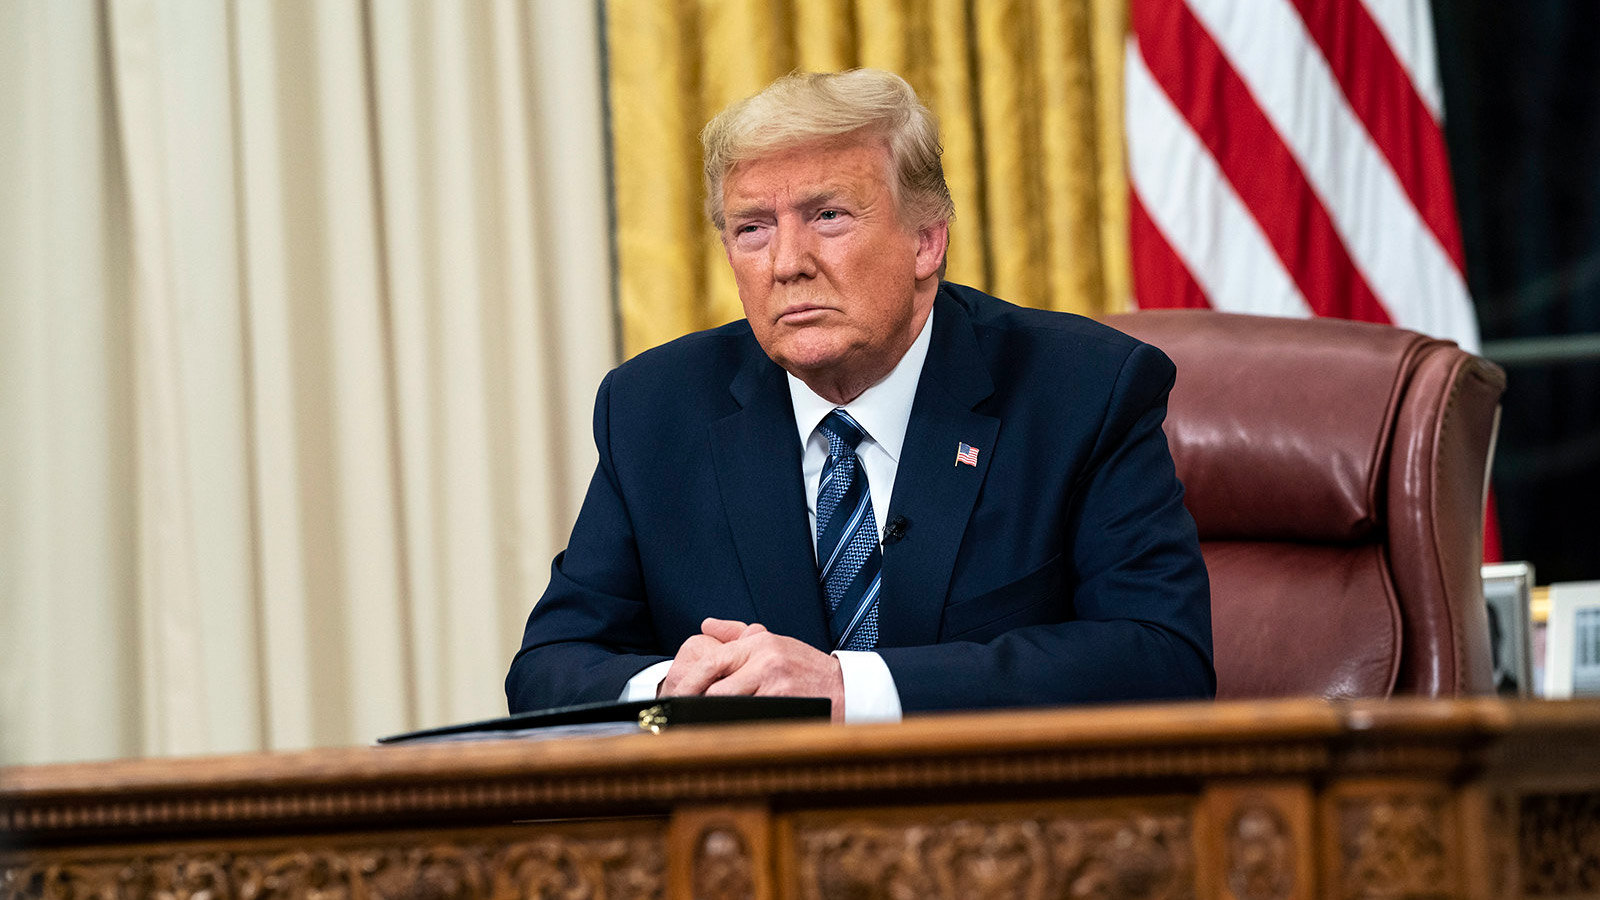 President Donald J. Trump addresses the nation from the Oval Office of the White House Wednesday evening, March 11, 2020, on the country’s expanded response against the global Coronavirus outbreak.